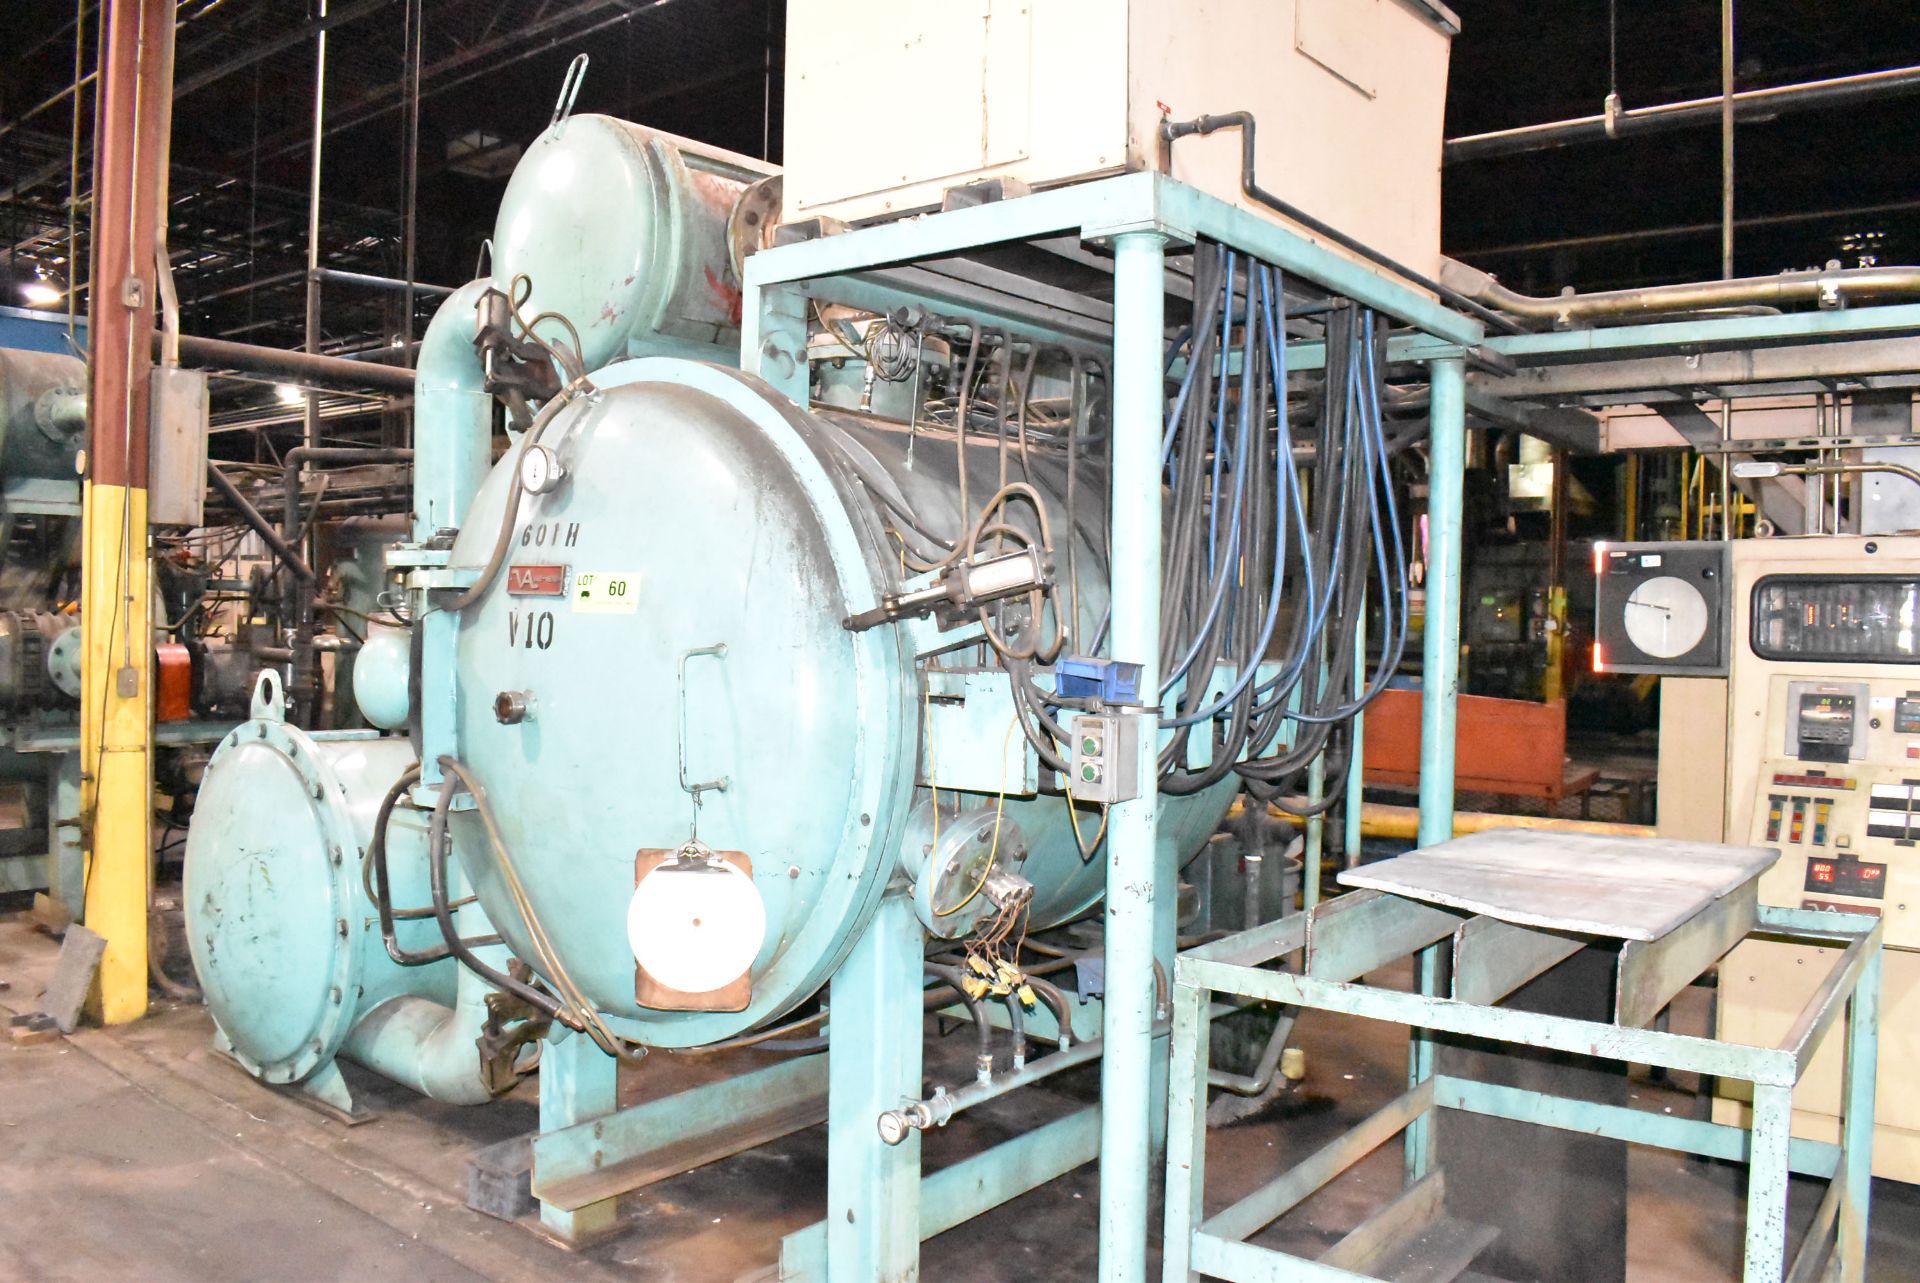 VAC-AERO VAH 3448 MP ELECTRIC VACUUM FURNACE WITH 2,400 DEGREES F MAX TEMP, 24"Wx24"Hx48"D APPROX - Image 6 of 16